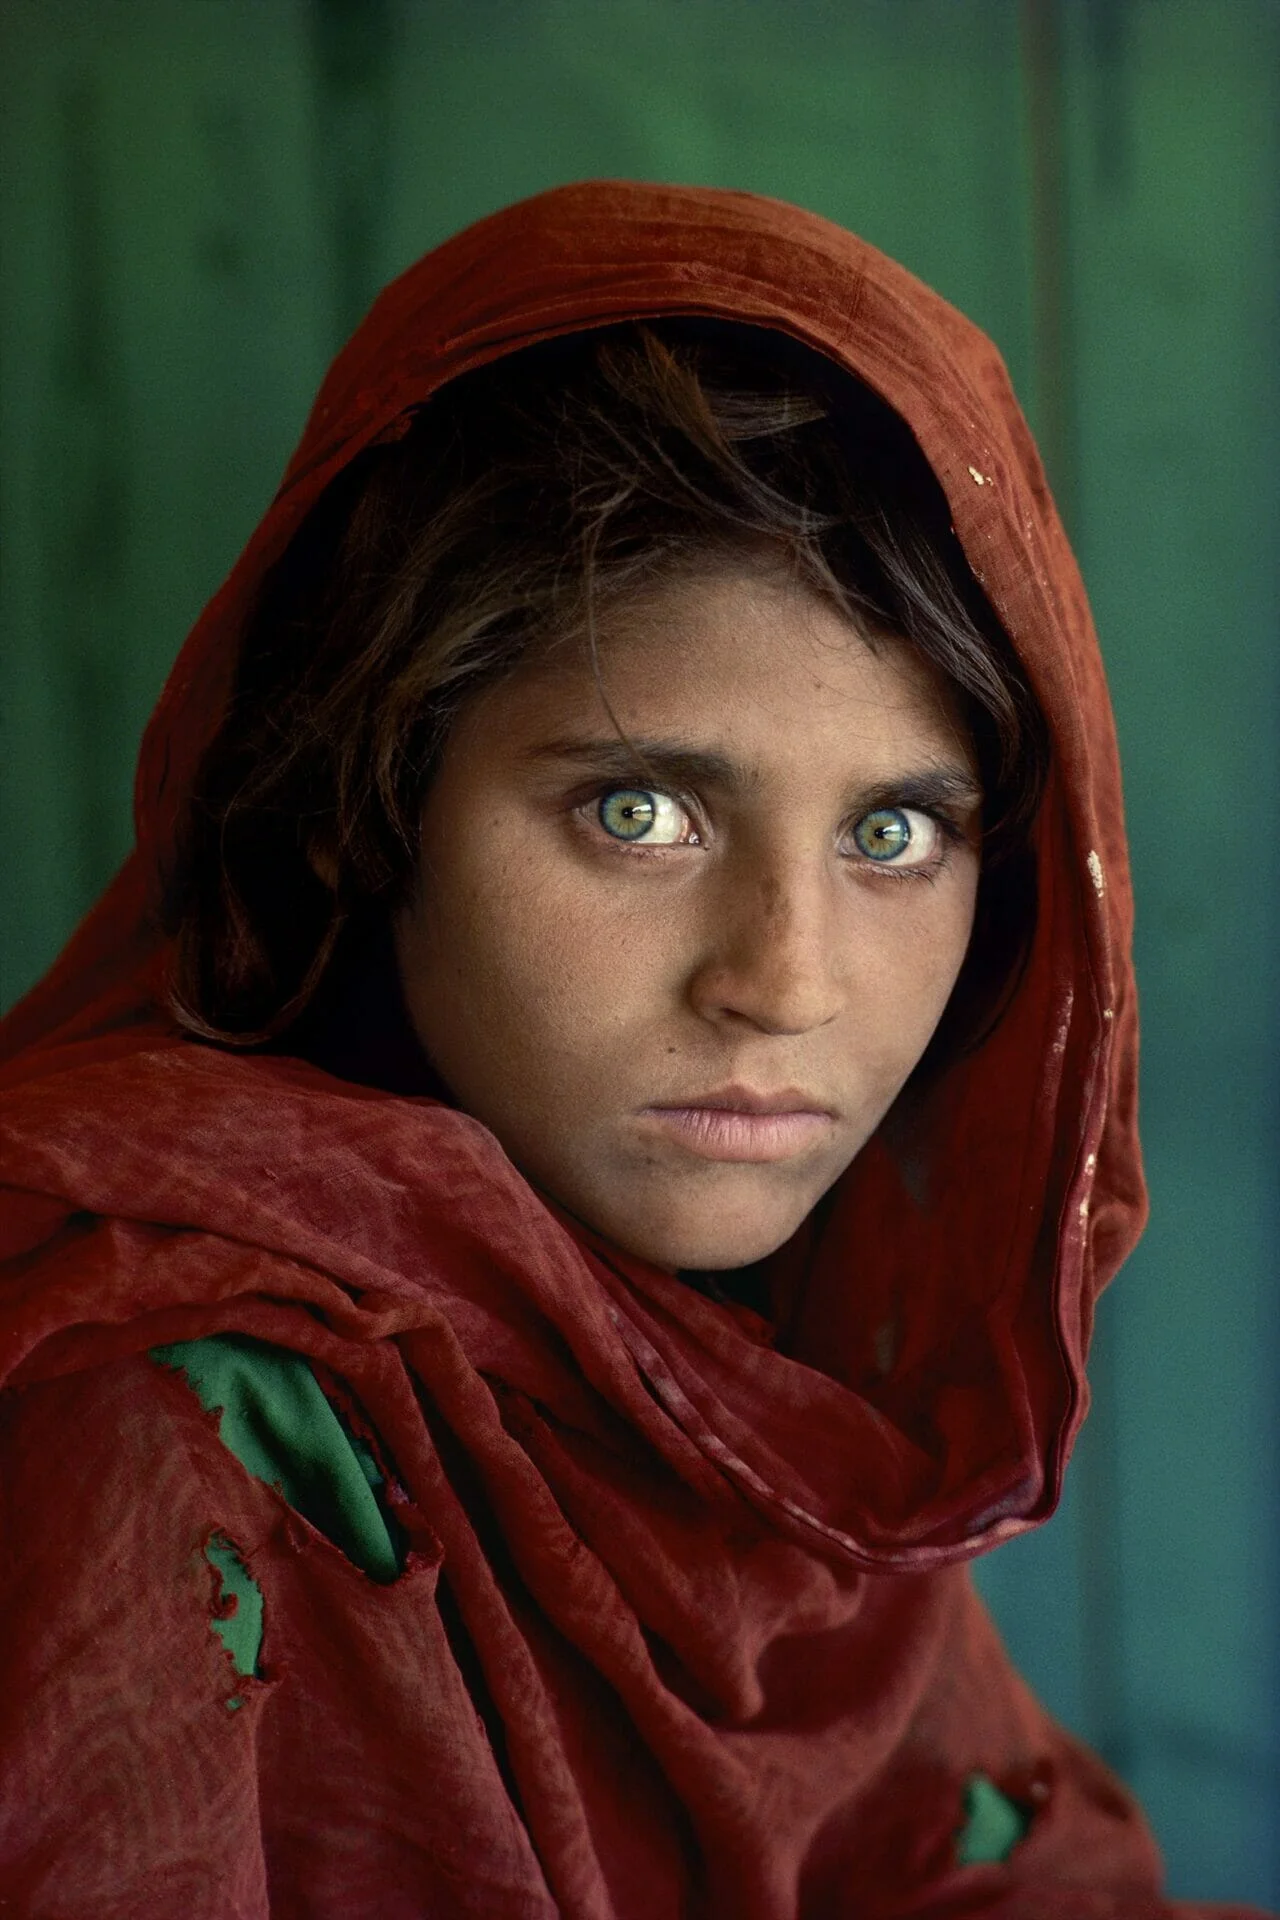 McCurry Capturing the World through his lens